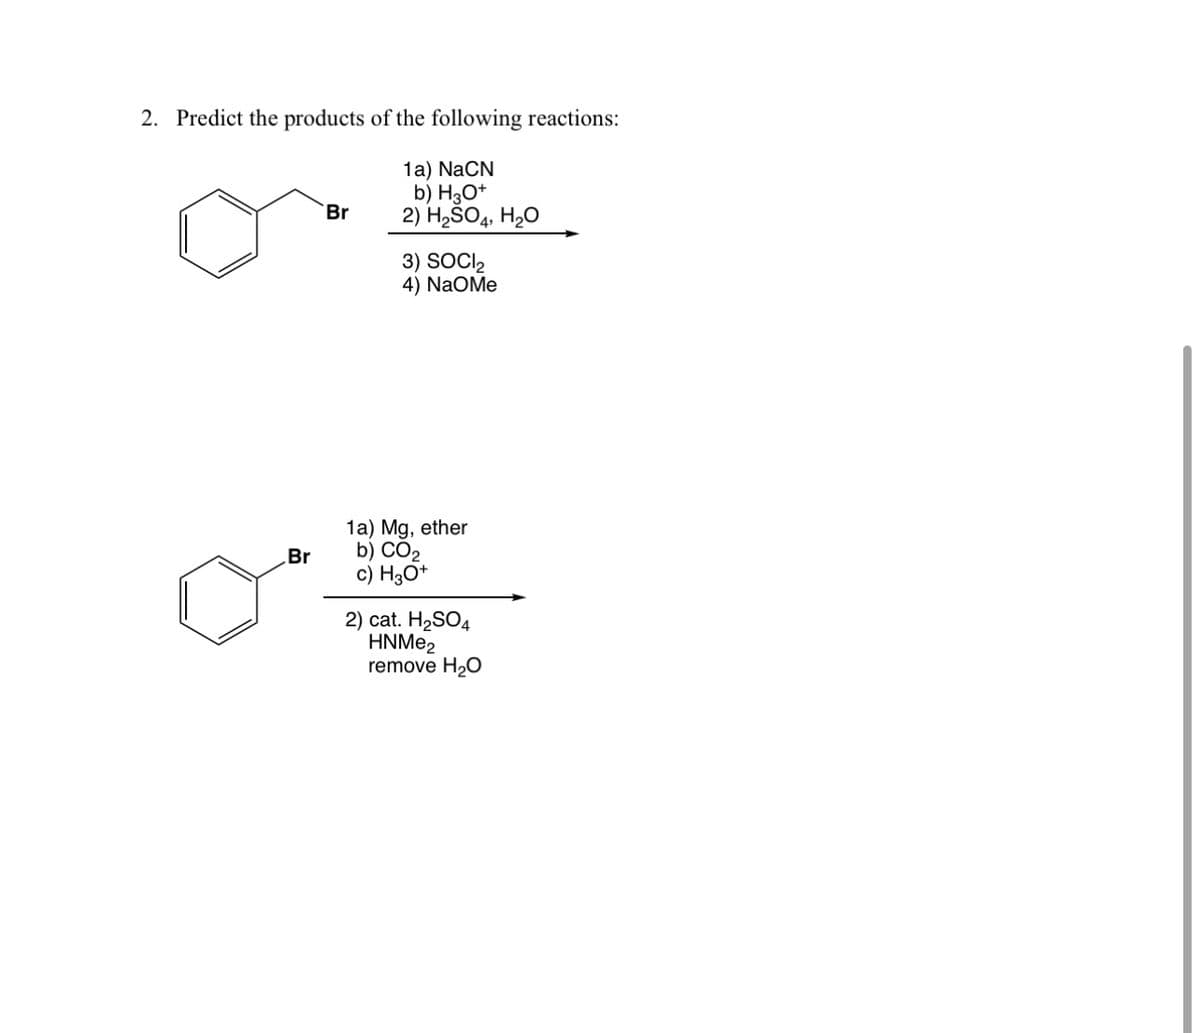 2. Predict the products of the following reactions:
Br
1a) NaCN
b) H3O+
2) H2SO4, H₂O
3) SOCI₂
4) NaOMe
1a) Mg, ether
Br
b) CO₂
c) H3O+
2) cat. H2SO4
HNMe2
remove H₂O